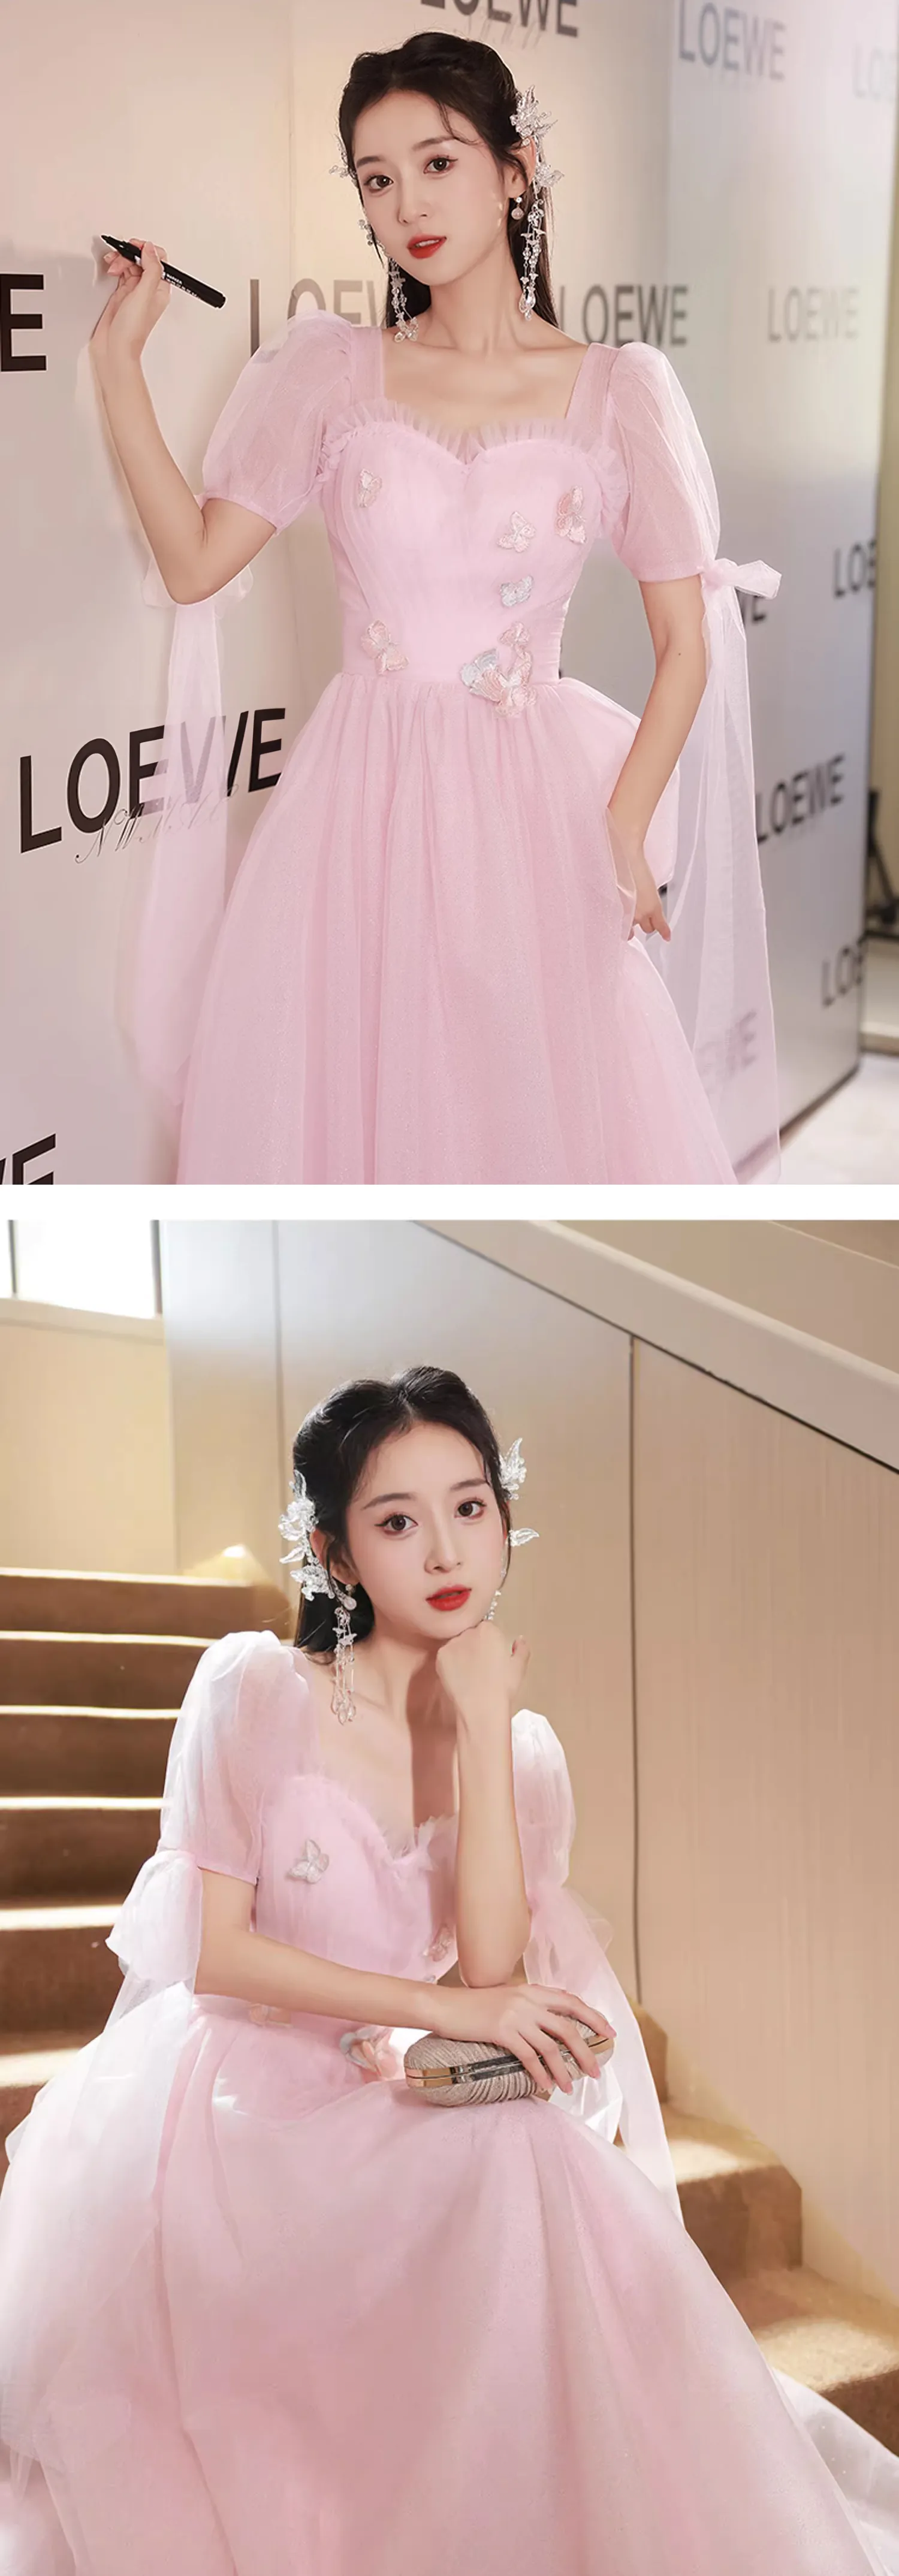 Sweet-Charming-Pink-Tulle-Short-Sleeve-Cocktail-Party-Evening-Dress12